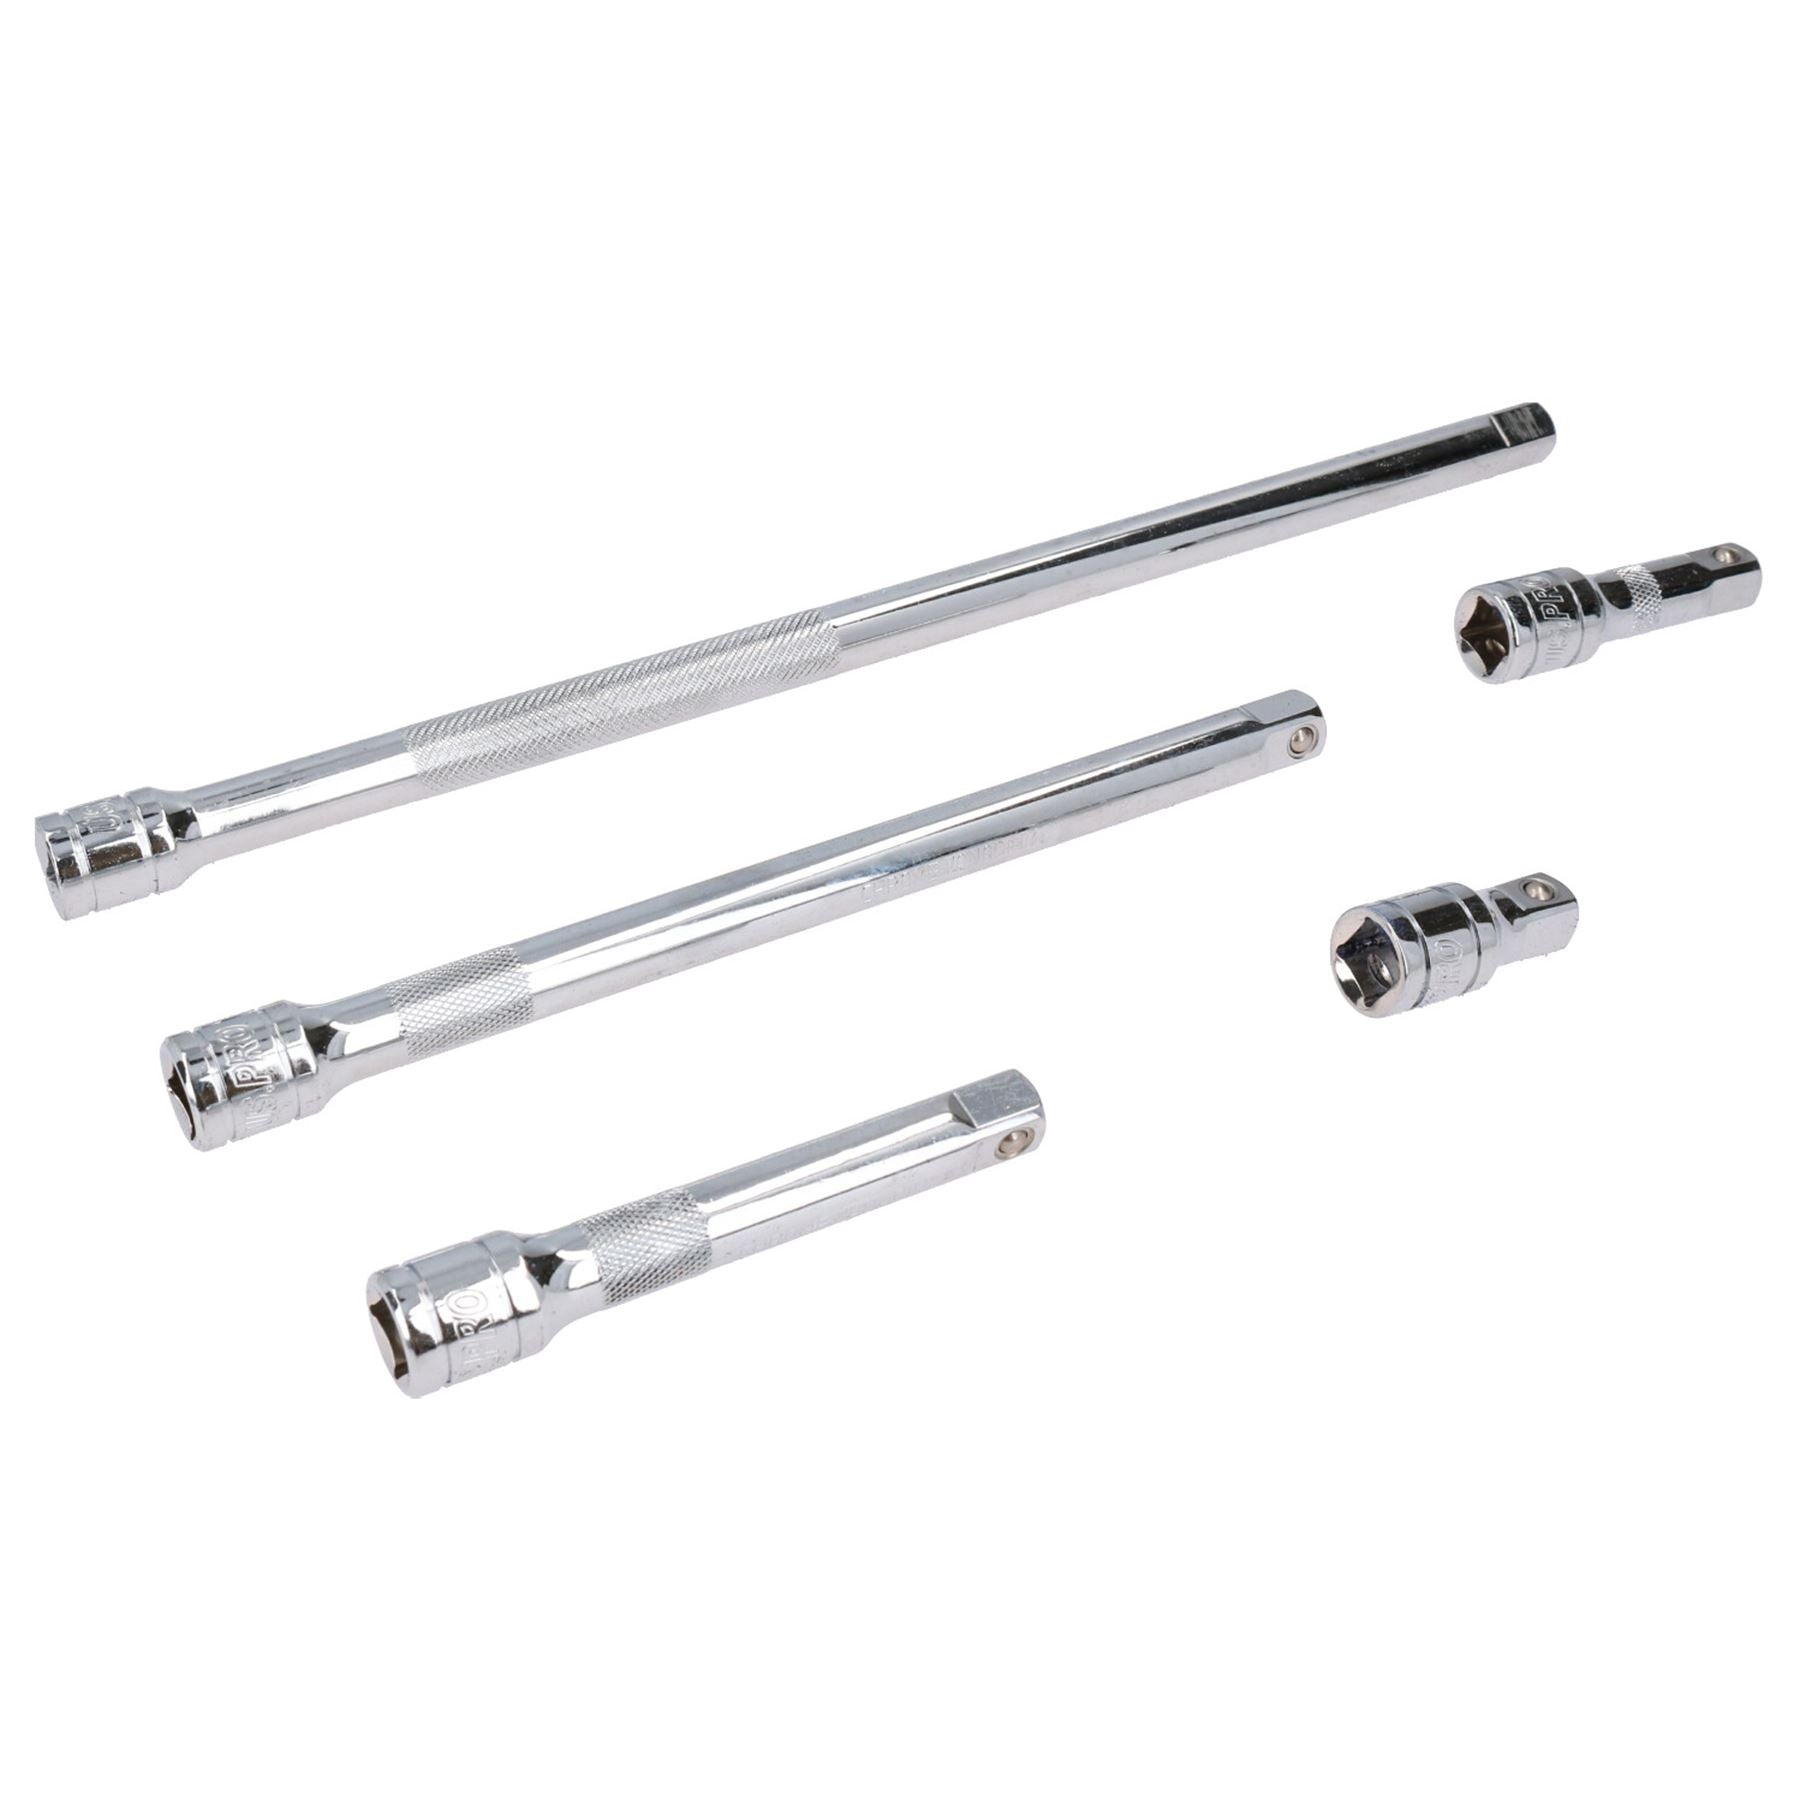 1/2" drive extension bar set 50mm - 375mm 5PC by BERGEN AT104